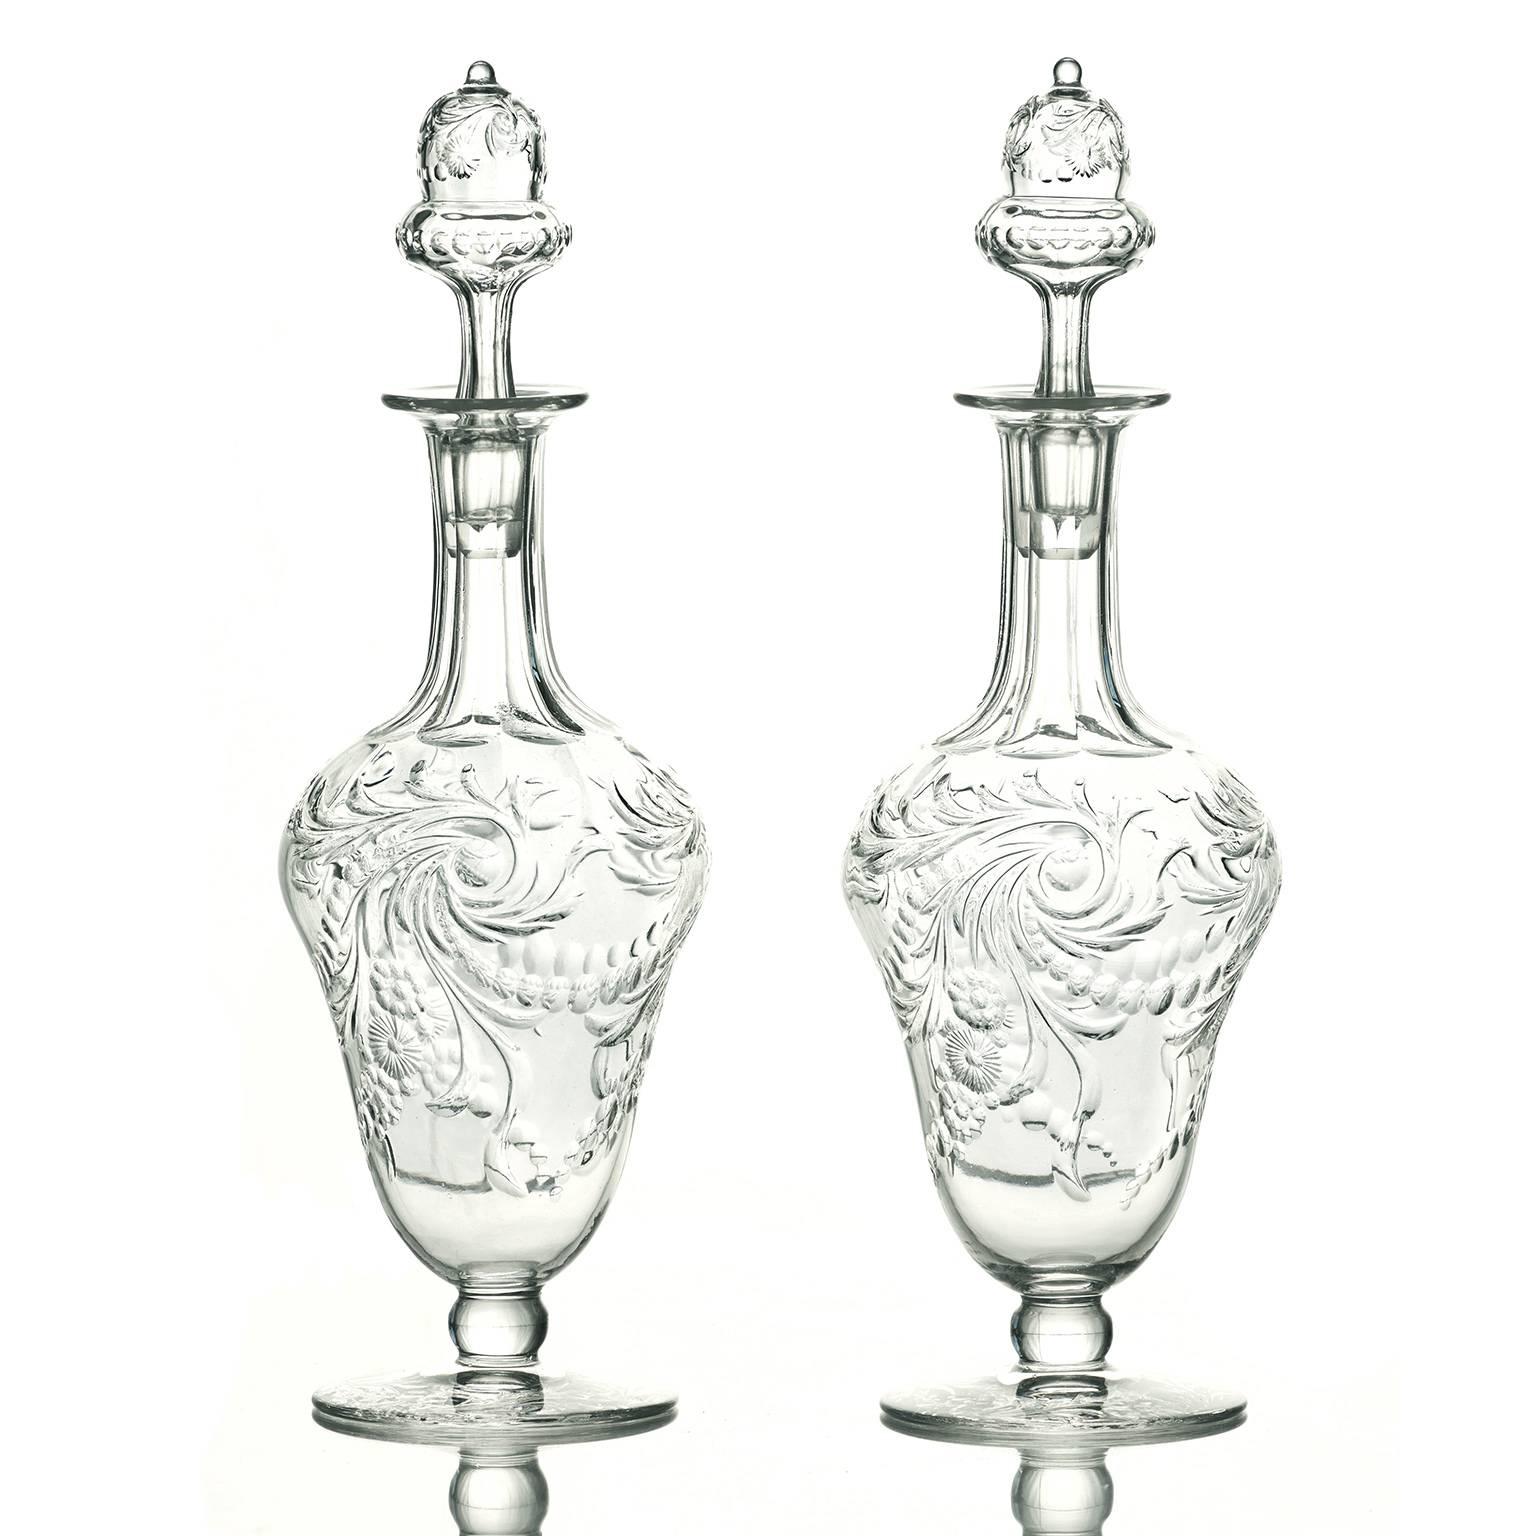 Circa 1890s, Webb, England.  This gorgeous pair of perfumes were made in a graceful baluster shape, hand-engraved in a Florentine-inspired motif and topped with acorn stoppers. Perfect for a vanity, they are fabulous for display. Beautifully